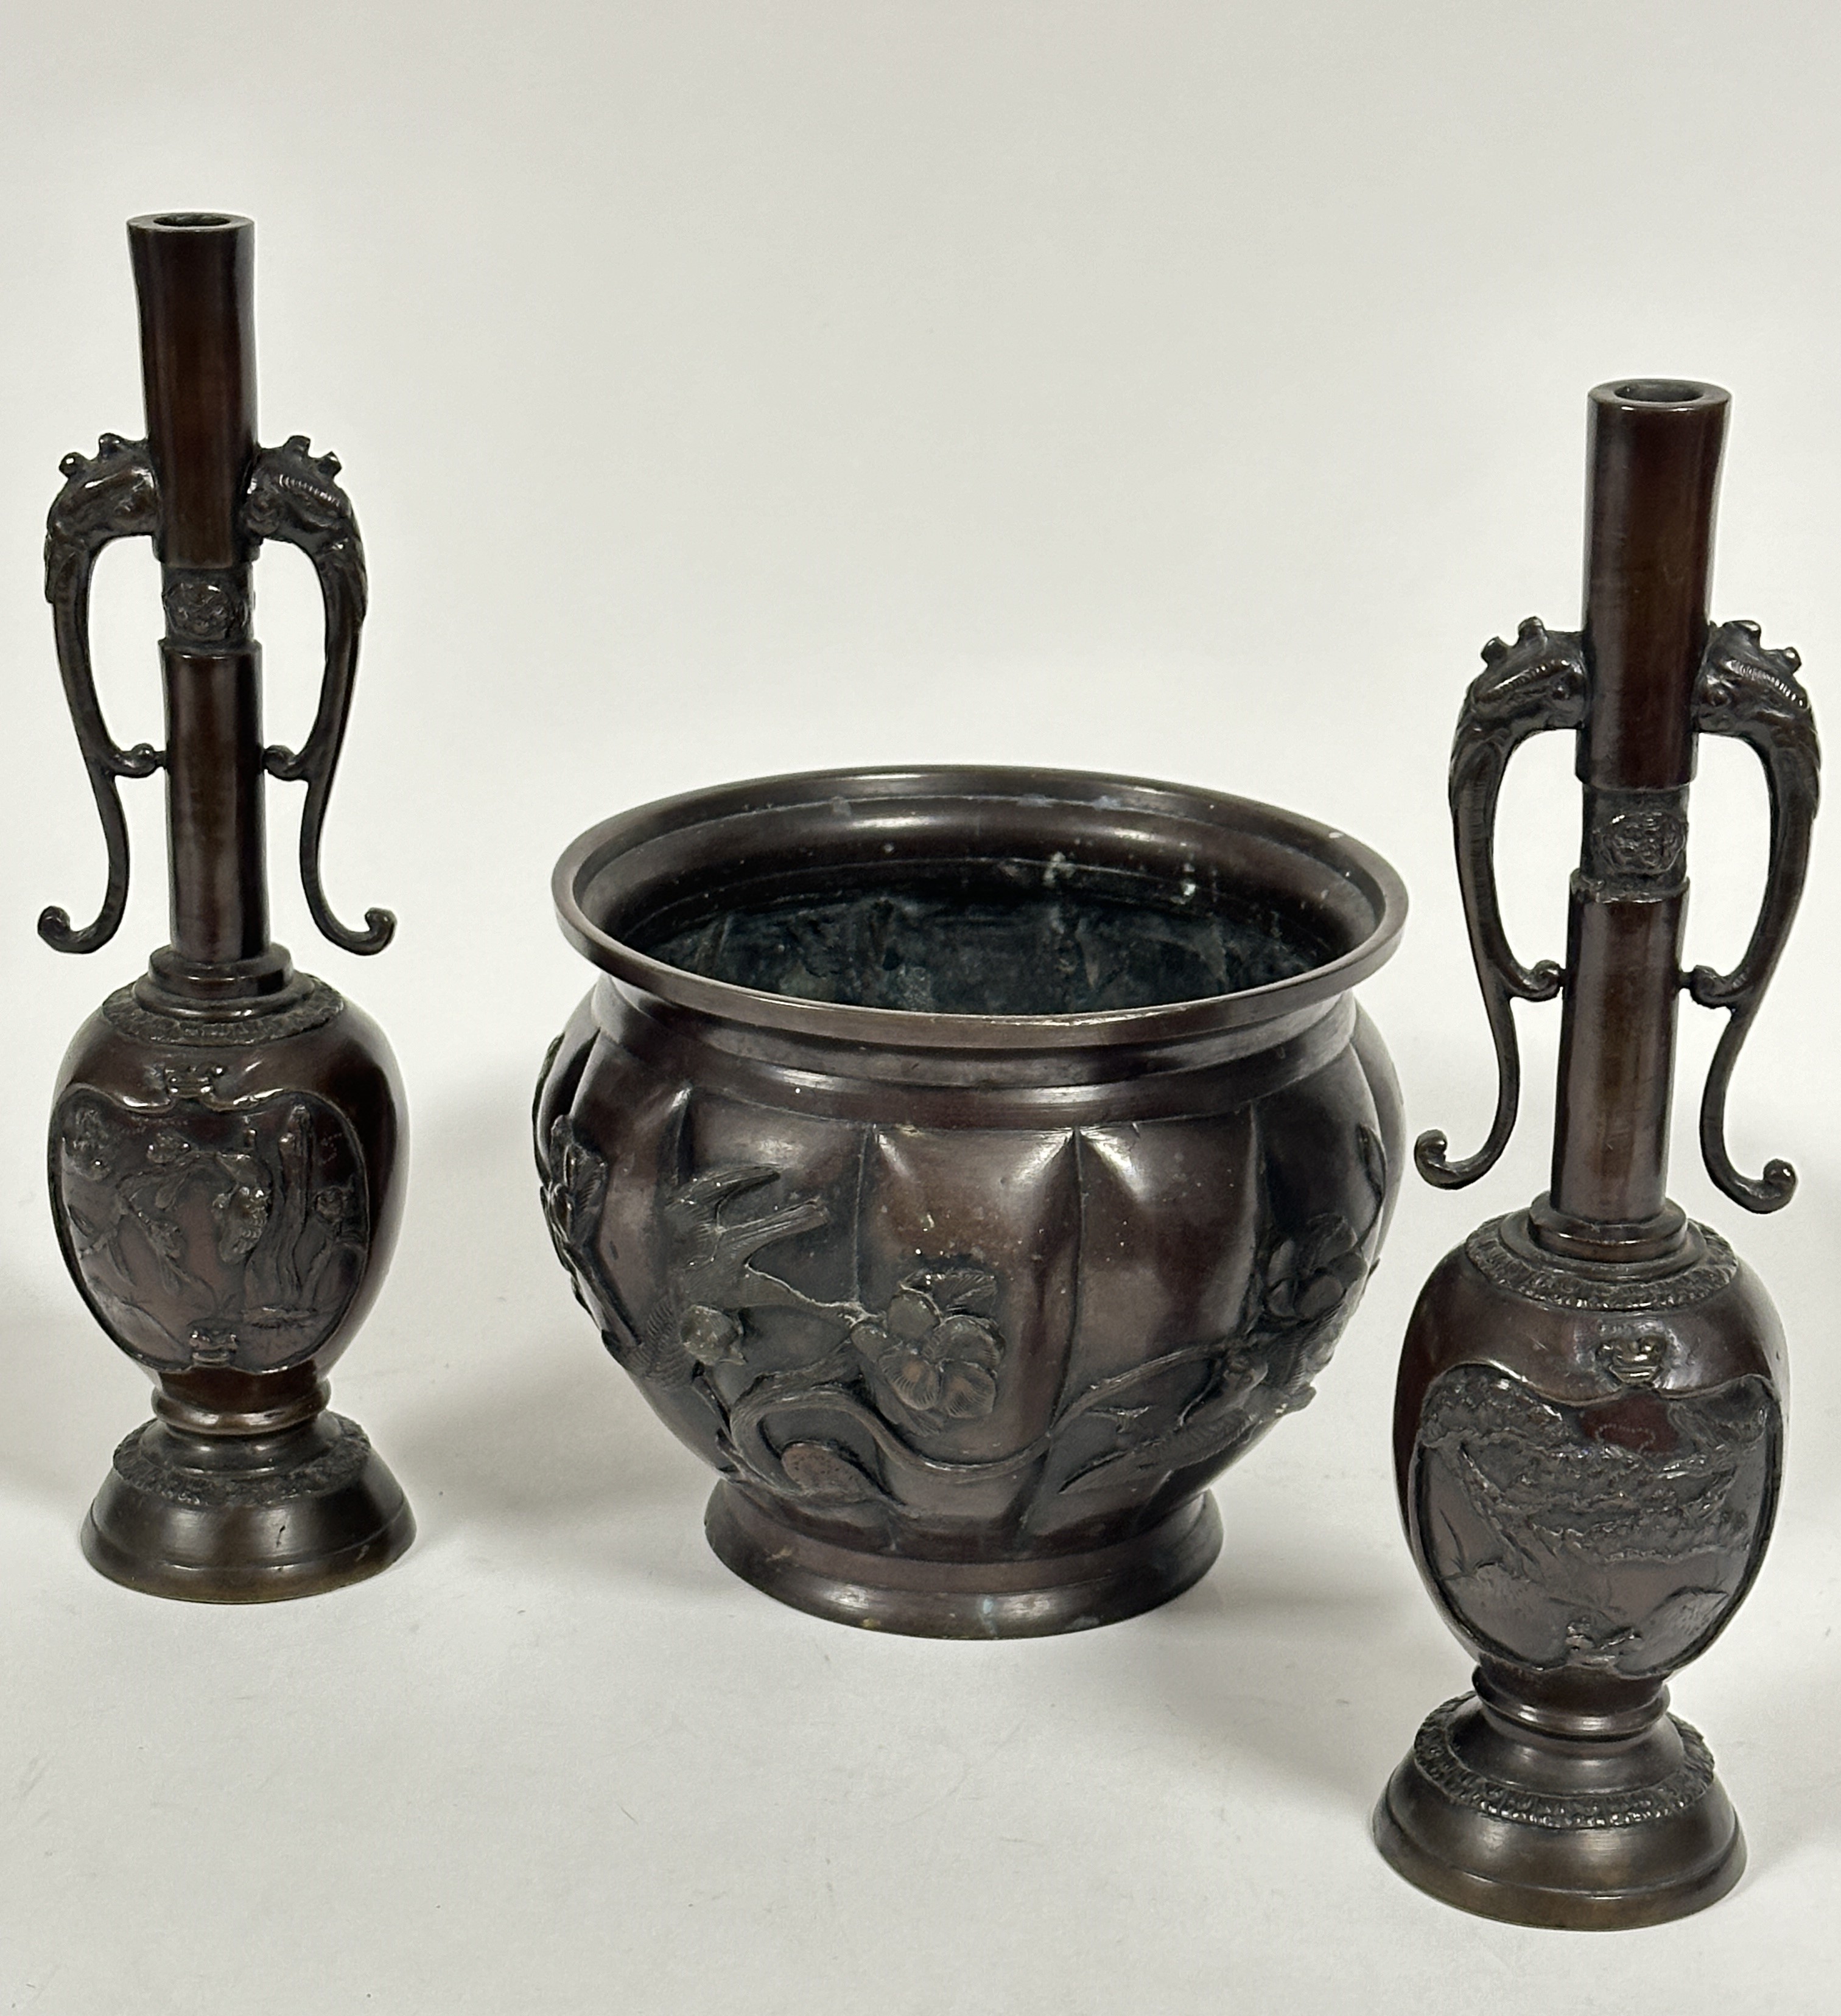 A Japanese patinated bronze jardiniere of paneled tapered design with cast bird and floral